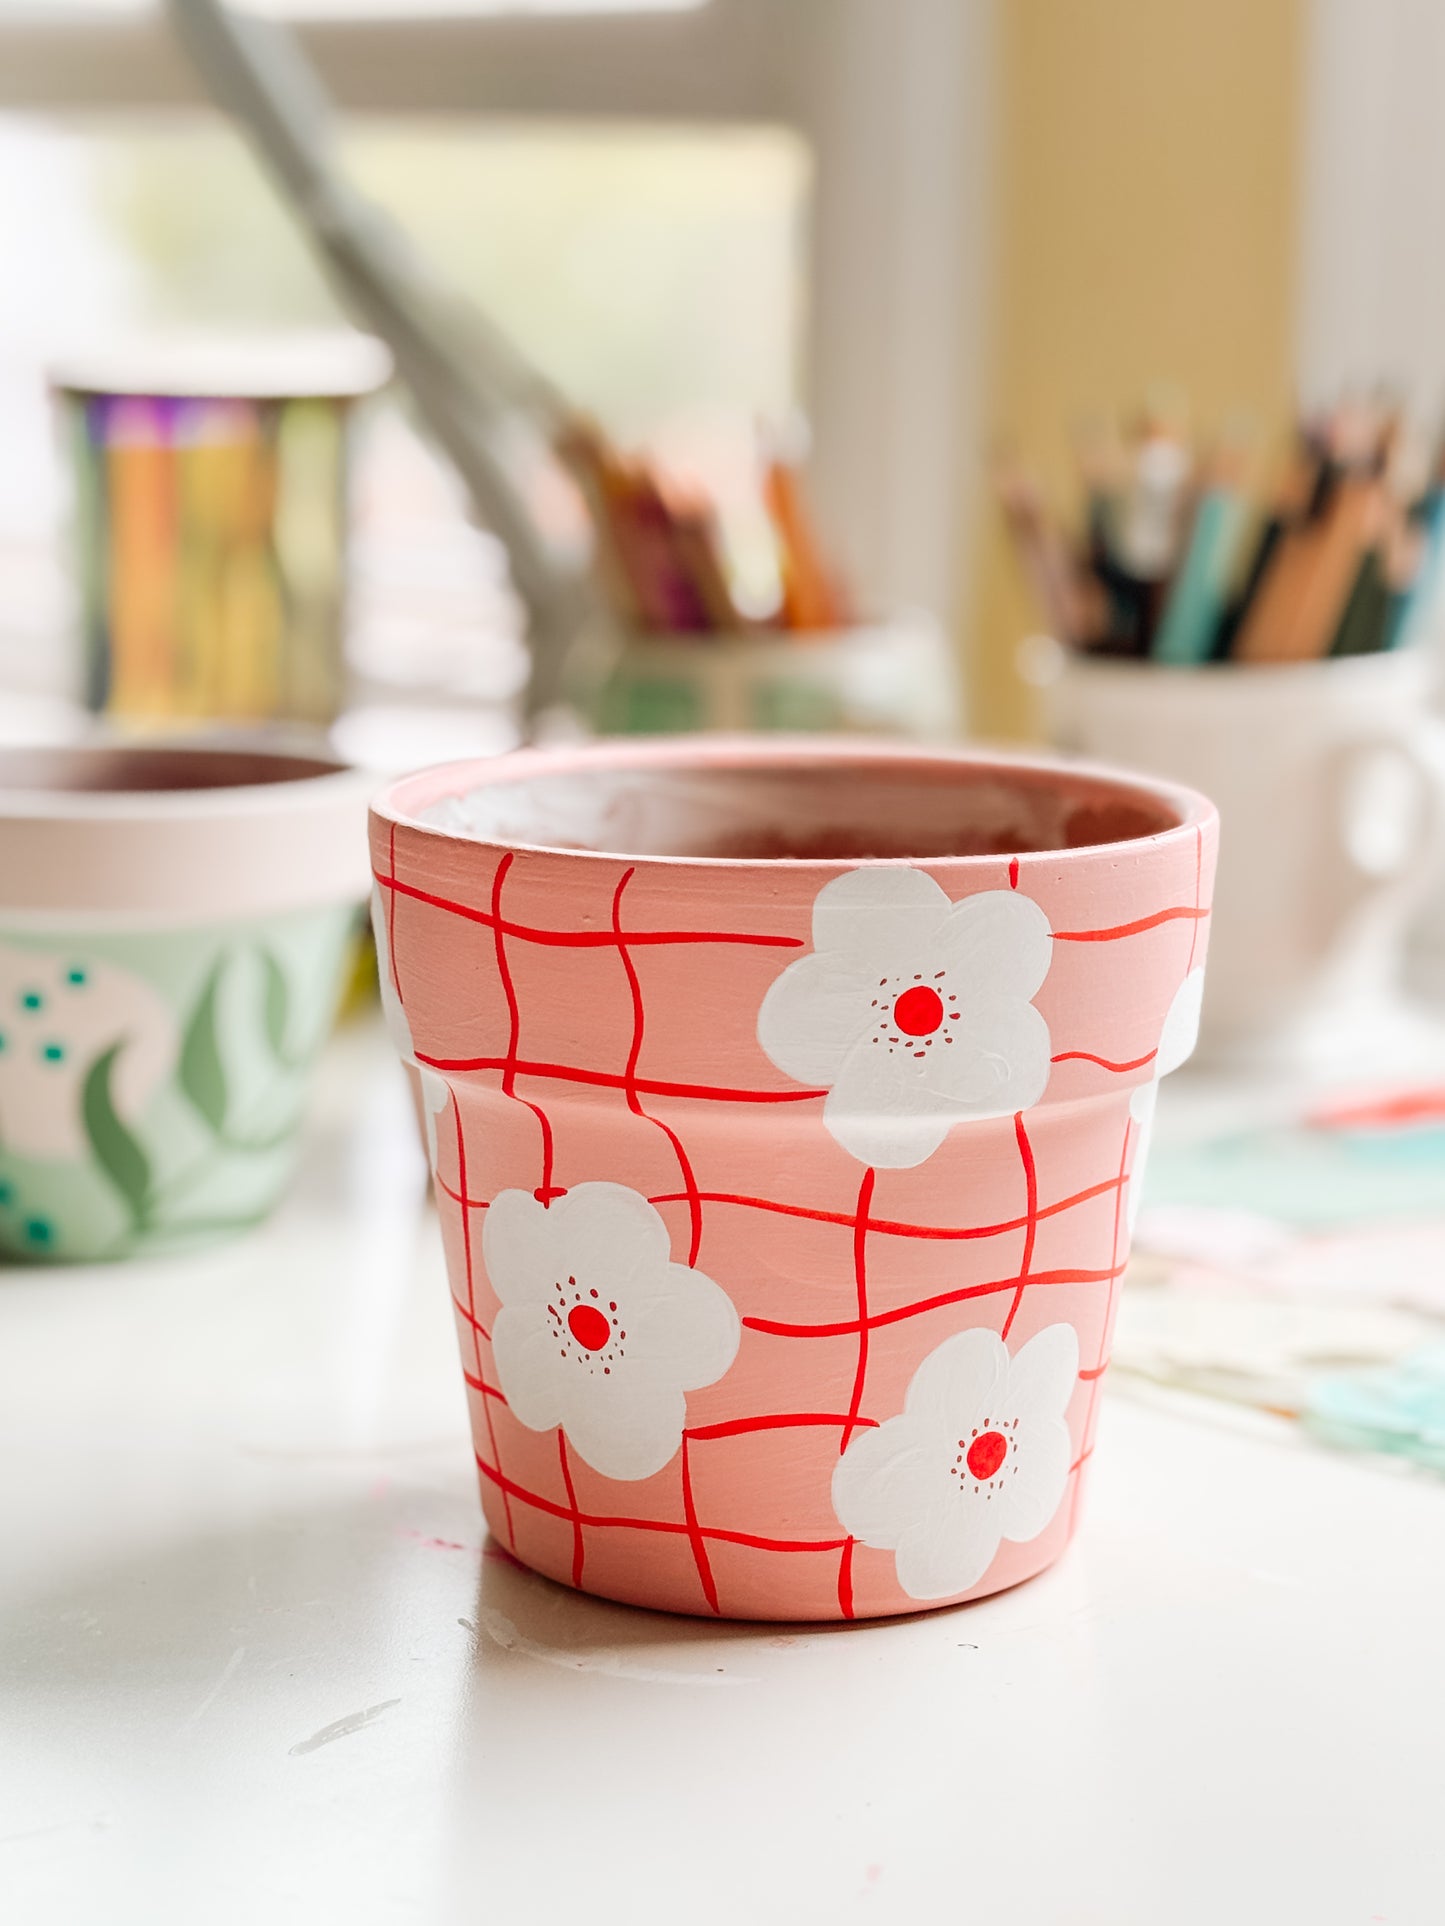 Crafternoons May Session: Painting Plant Pots